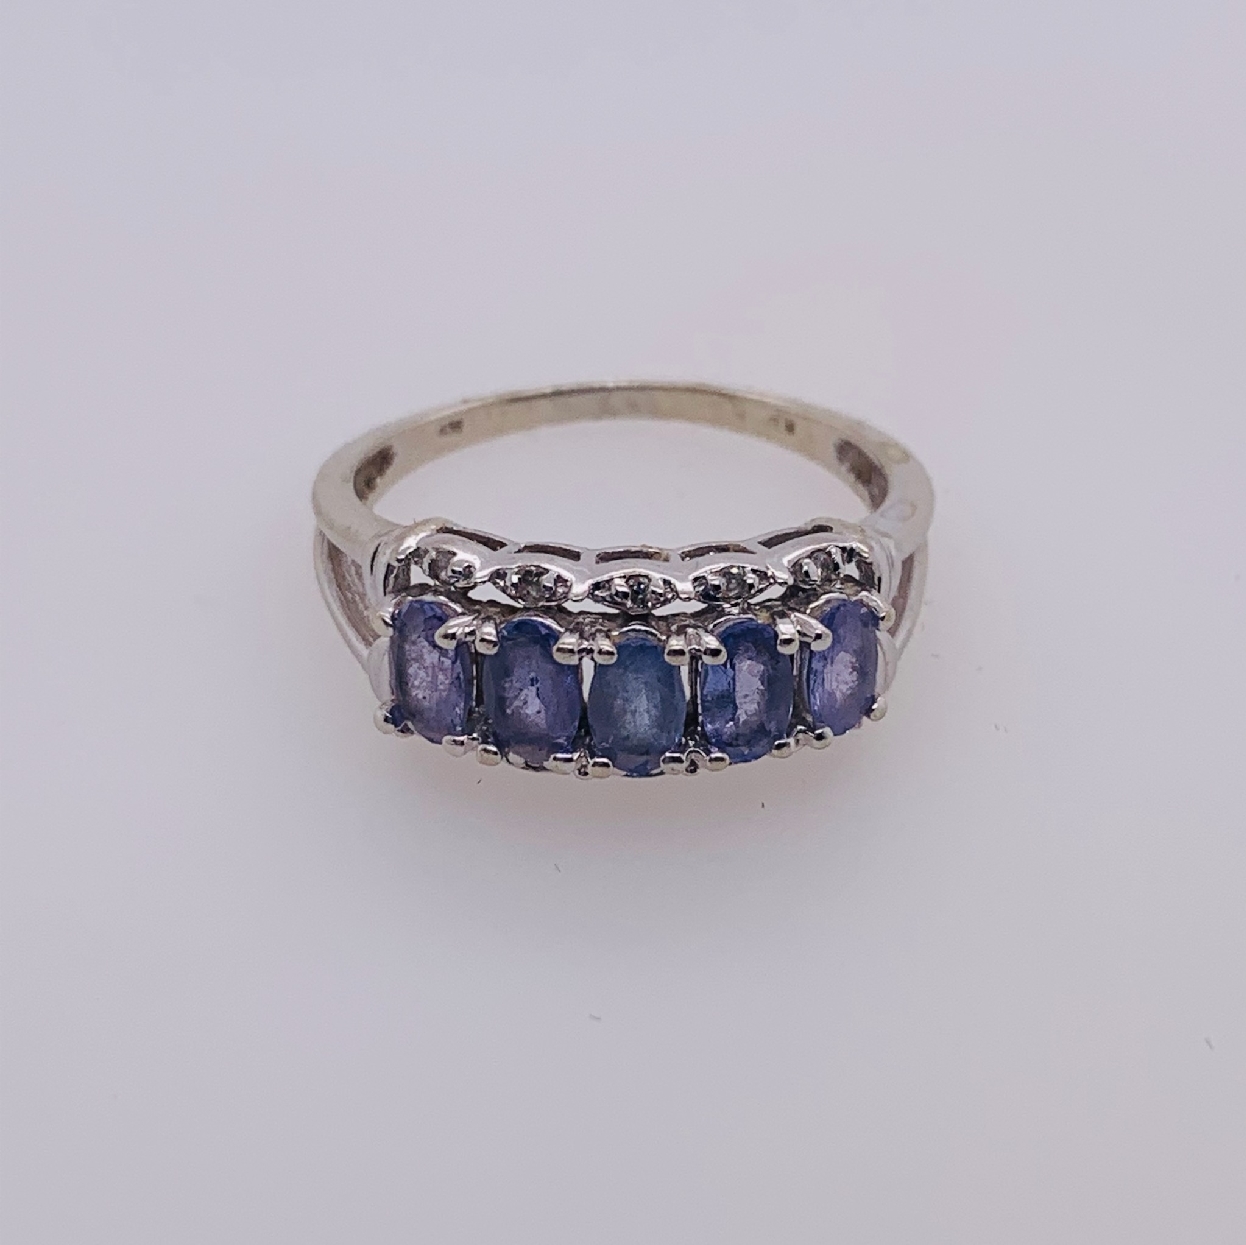 14K White Gold Ring with Tanzanite and Diamond Accents Size 9